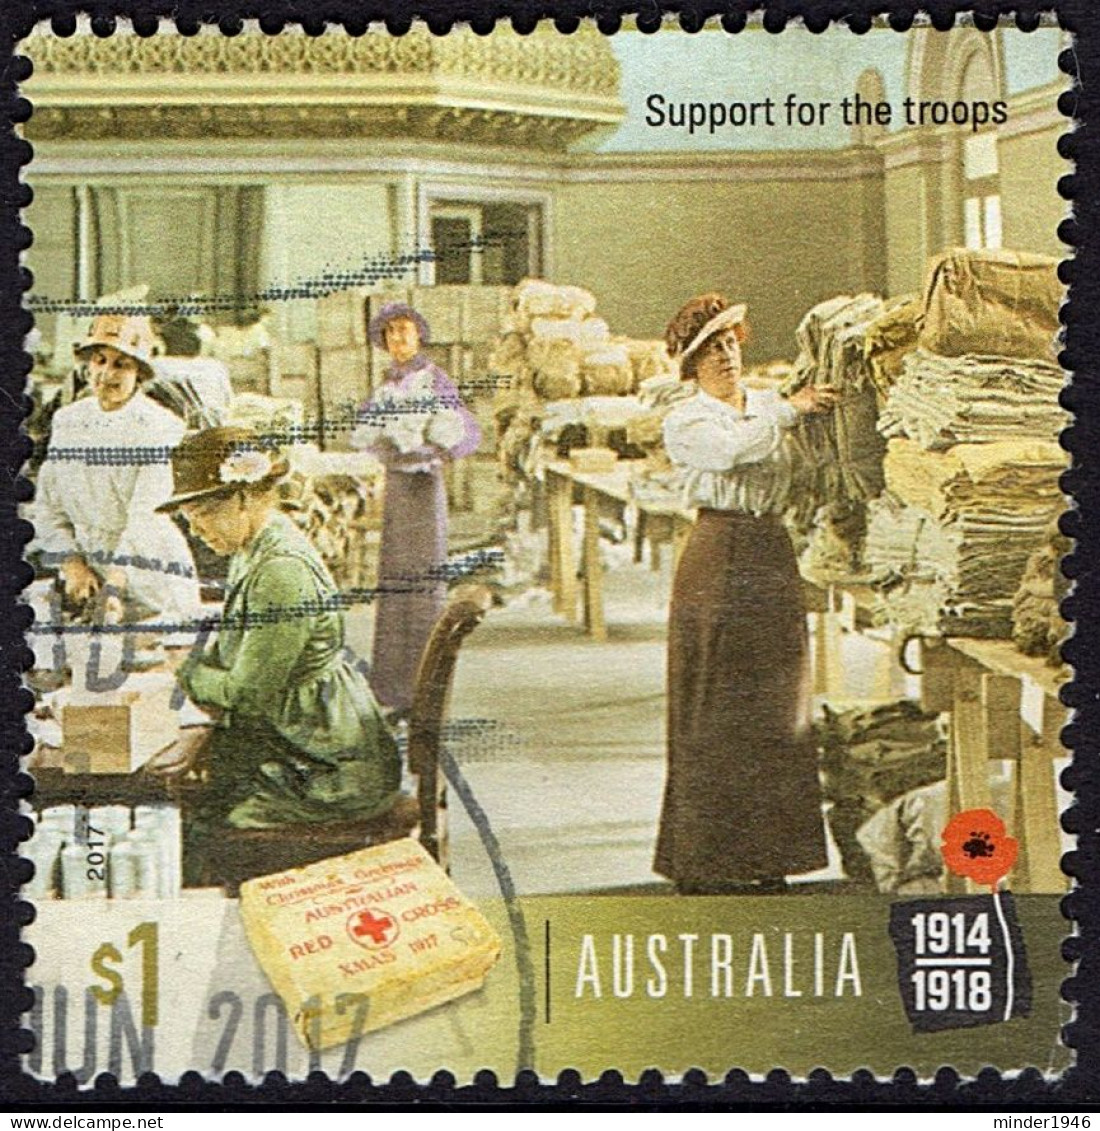 AUSTRALIA 2017 $1 Multicoloured, Centenary Of WWI 1917-Support For The Troops Used - Gebruikt